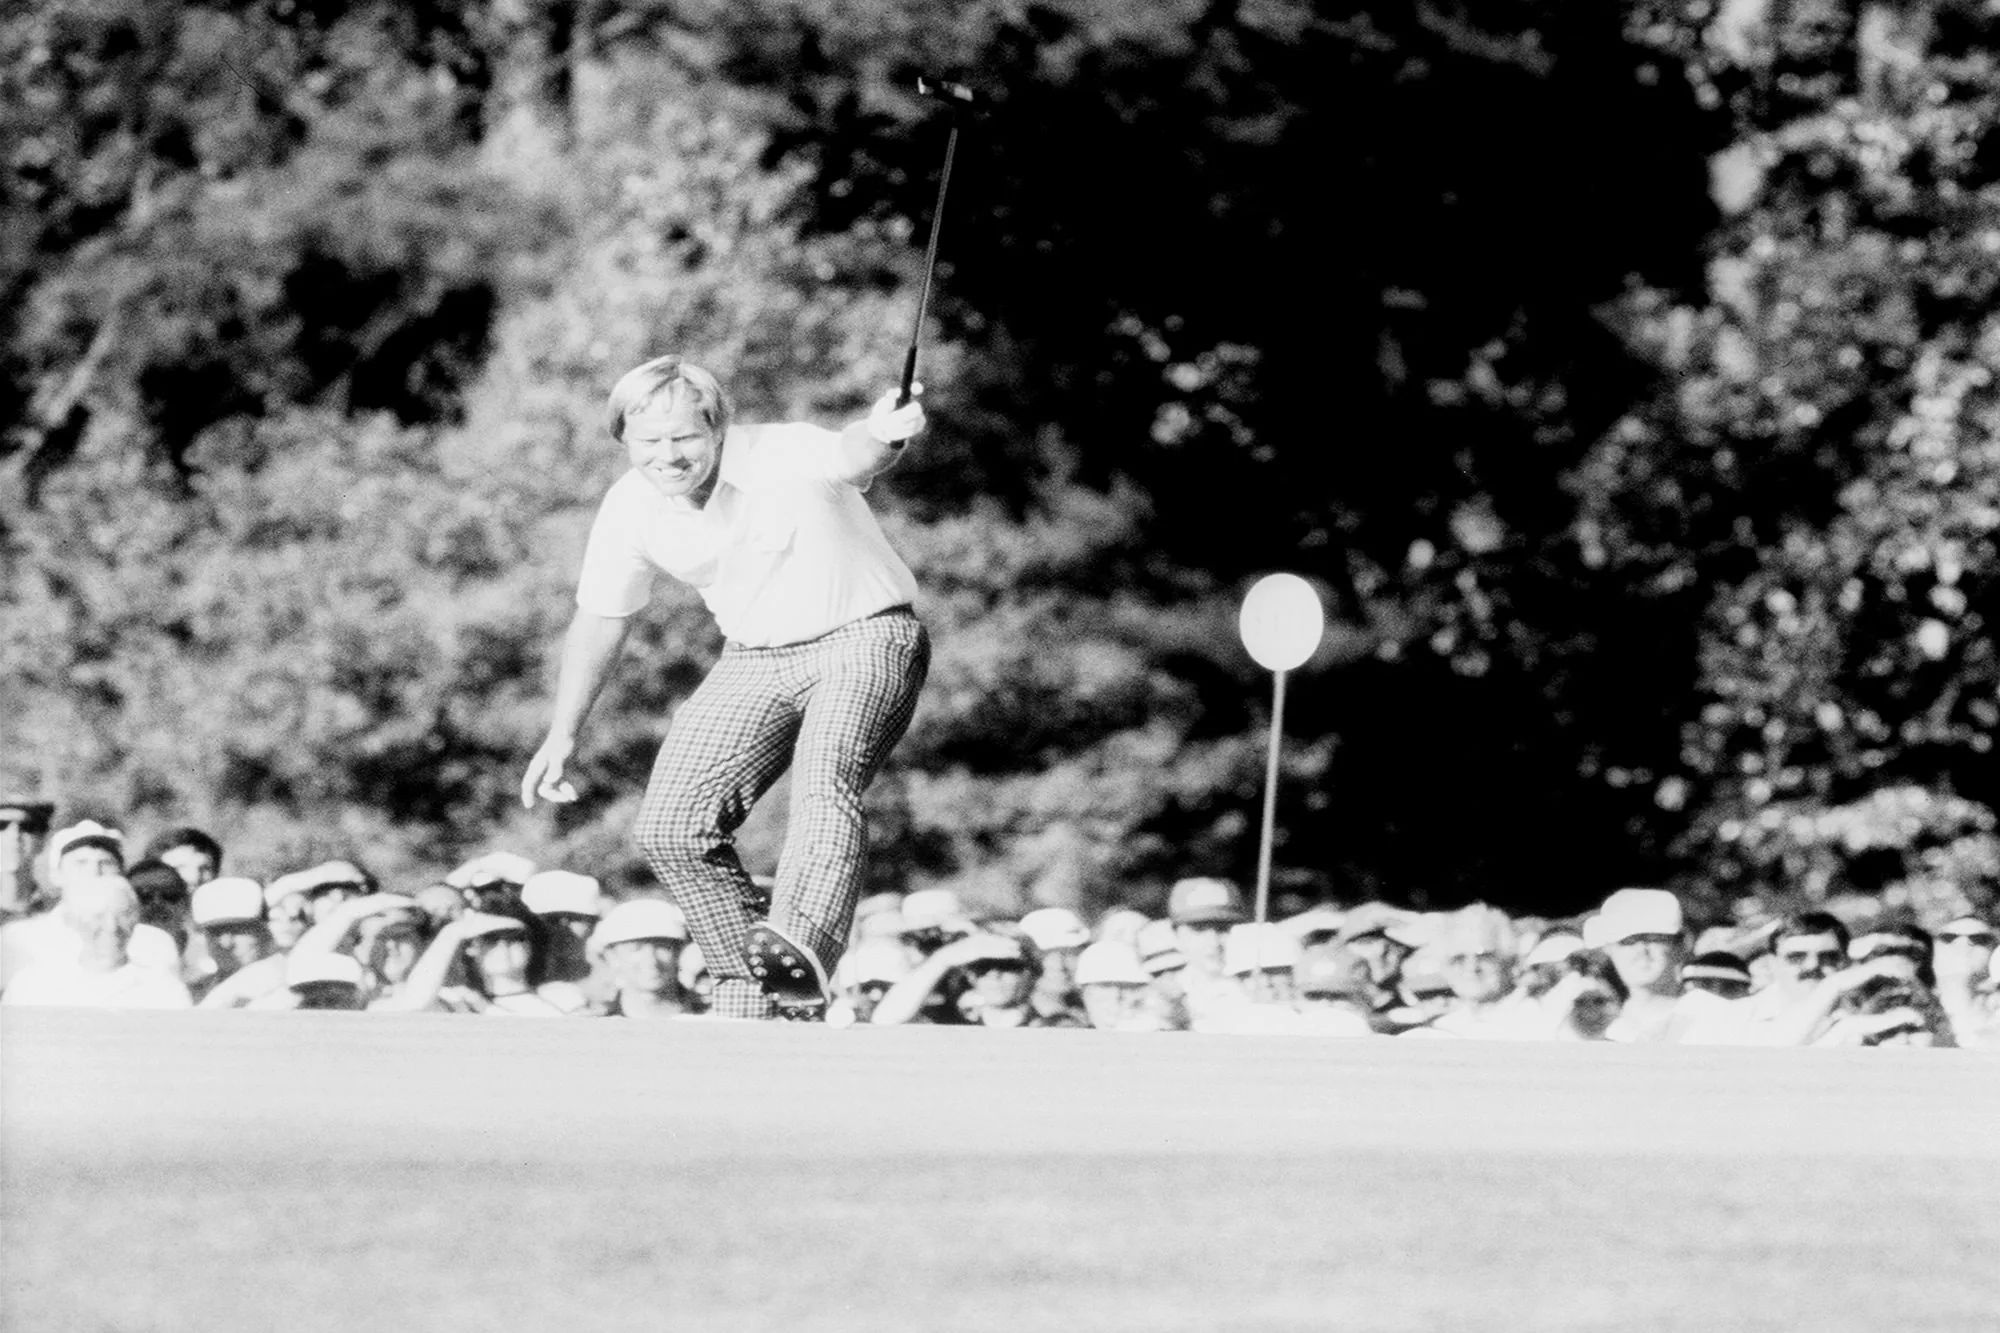 Nicklaus and the '86 Masters – in his own words